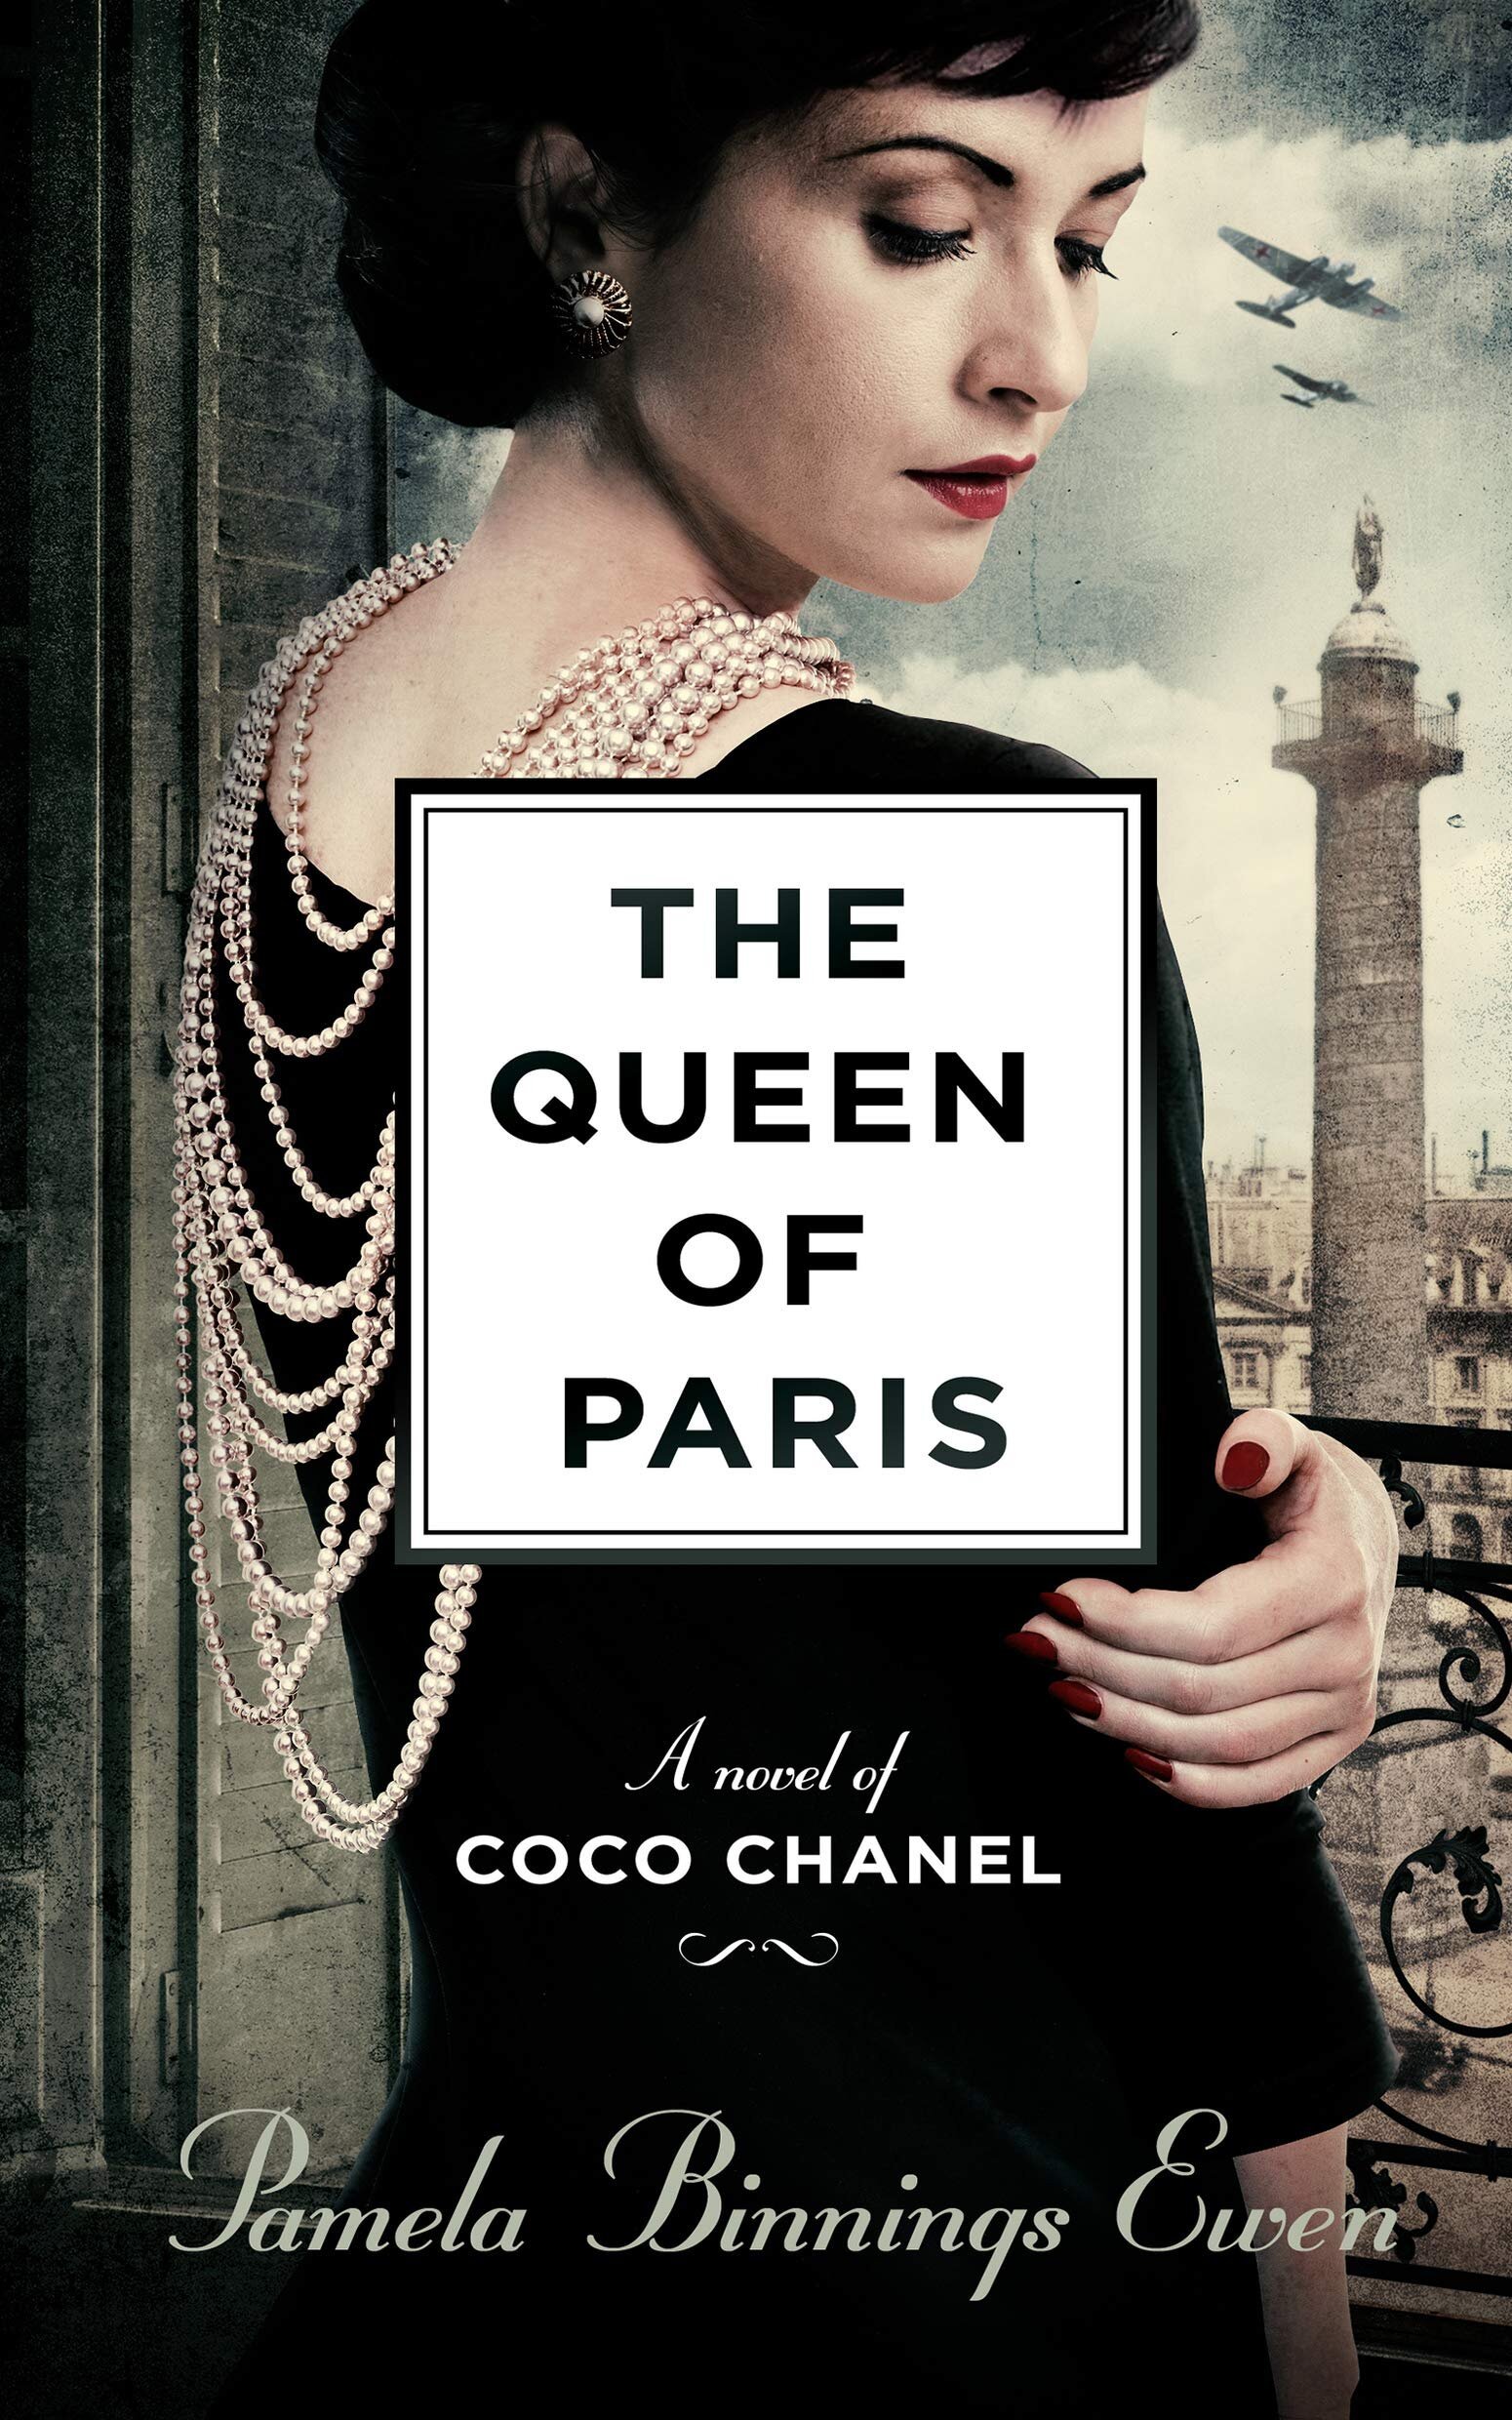 coco chanel designs images